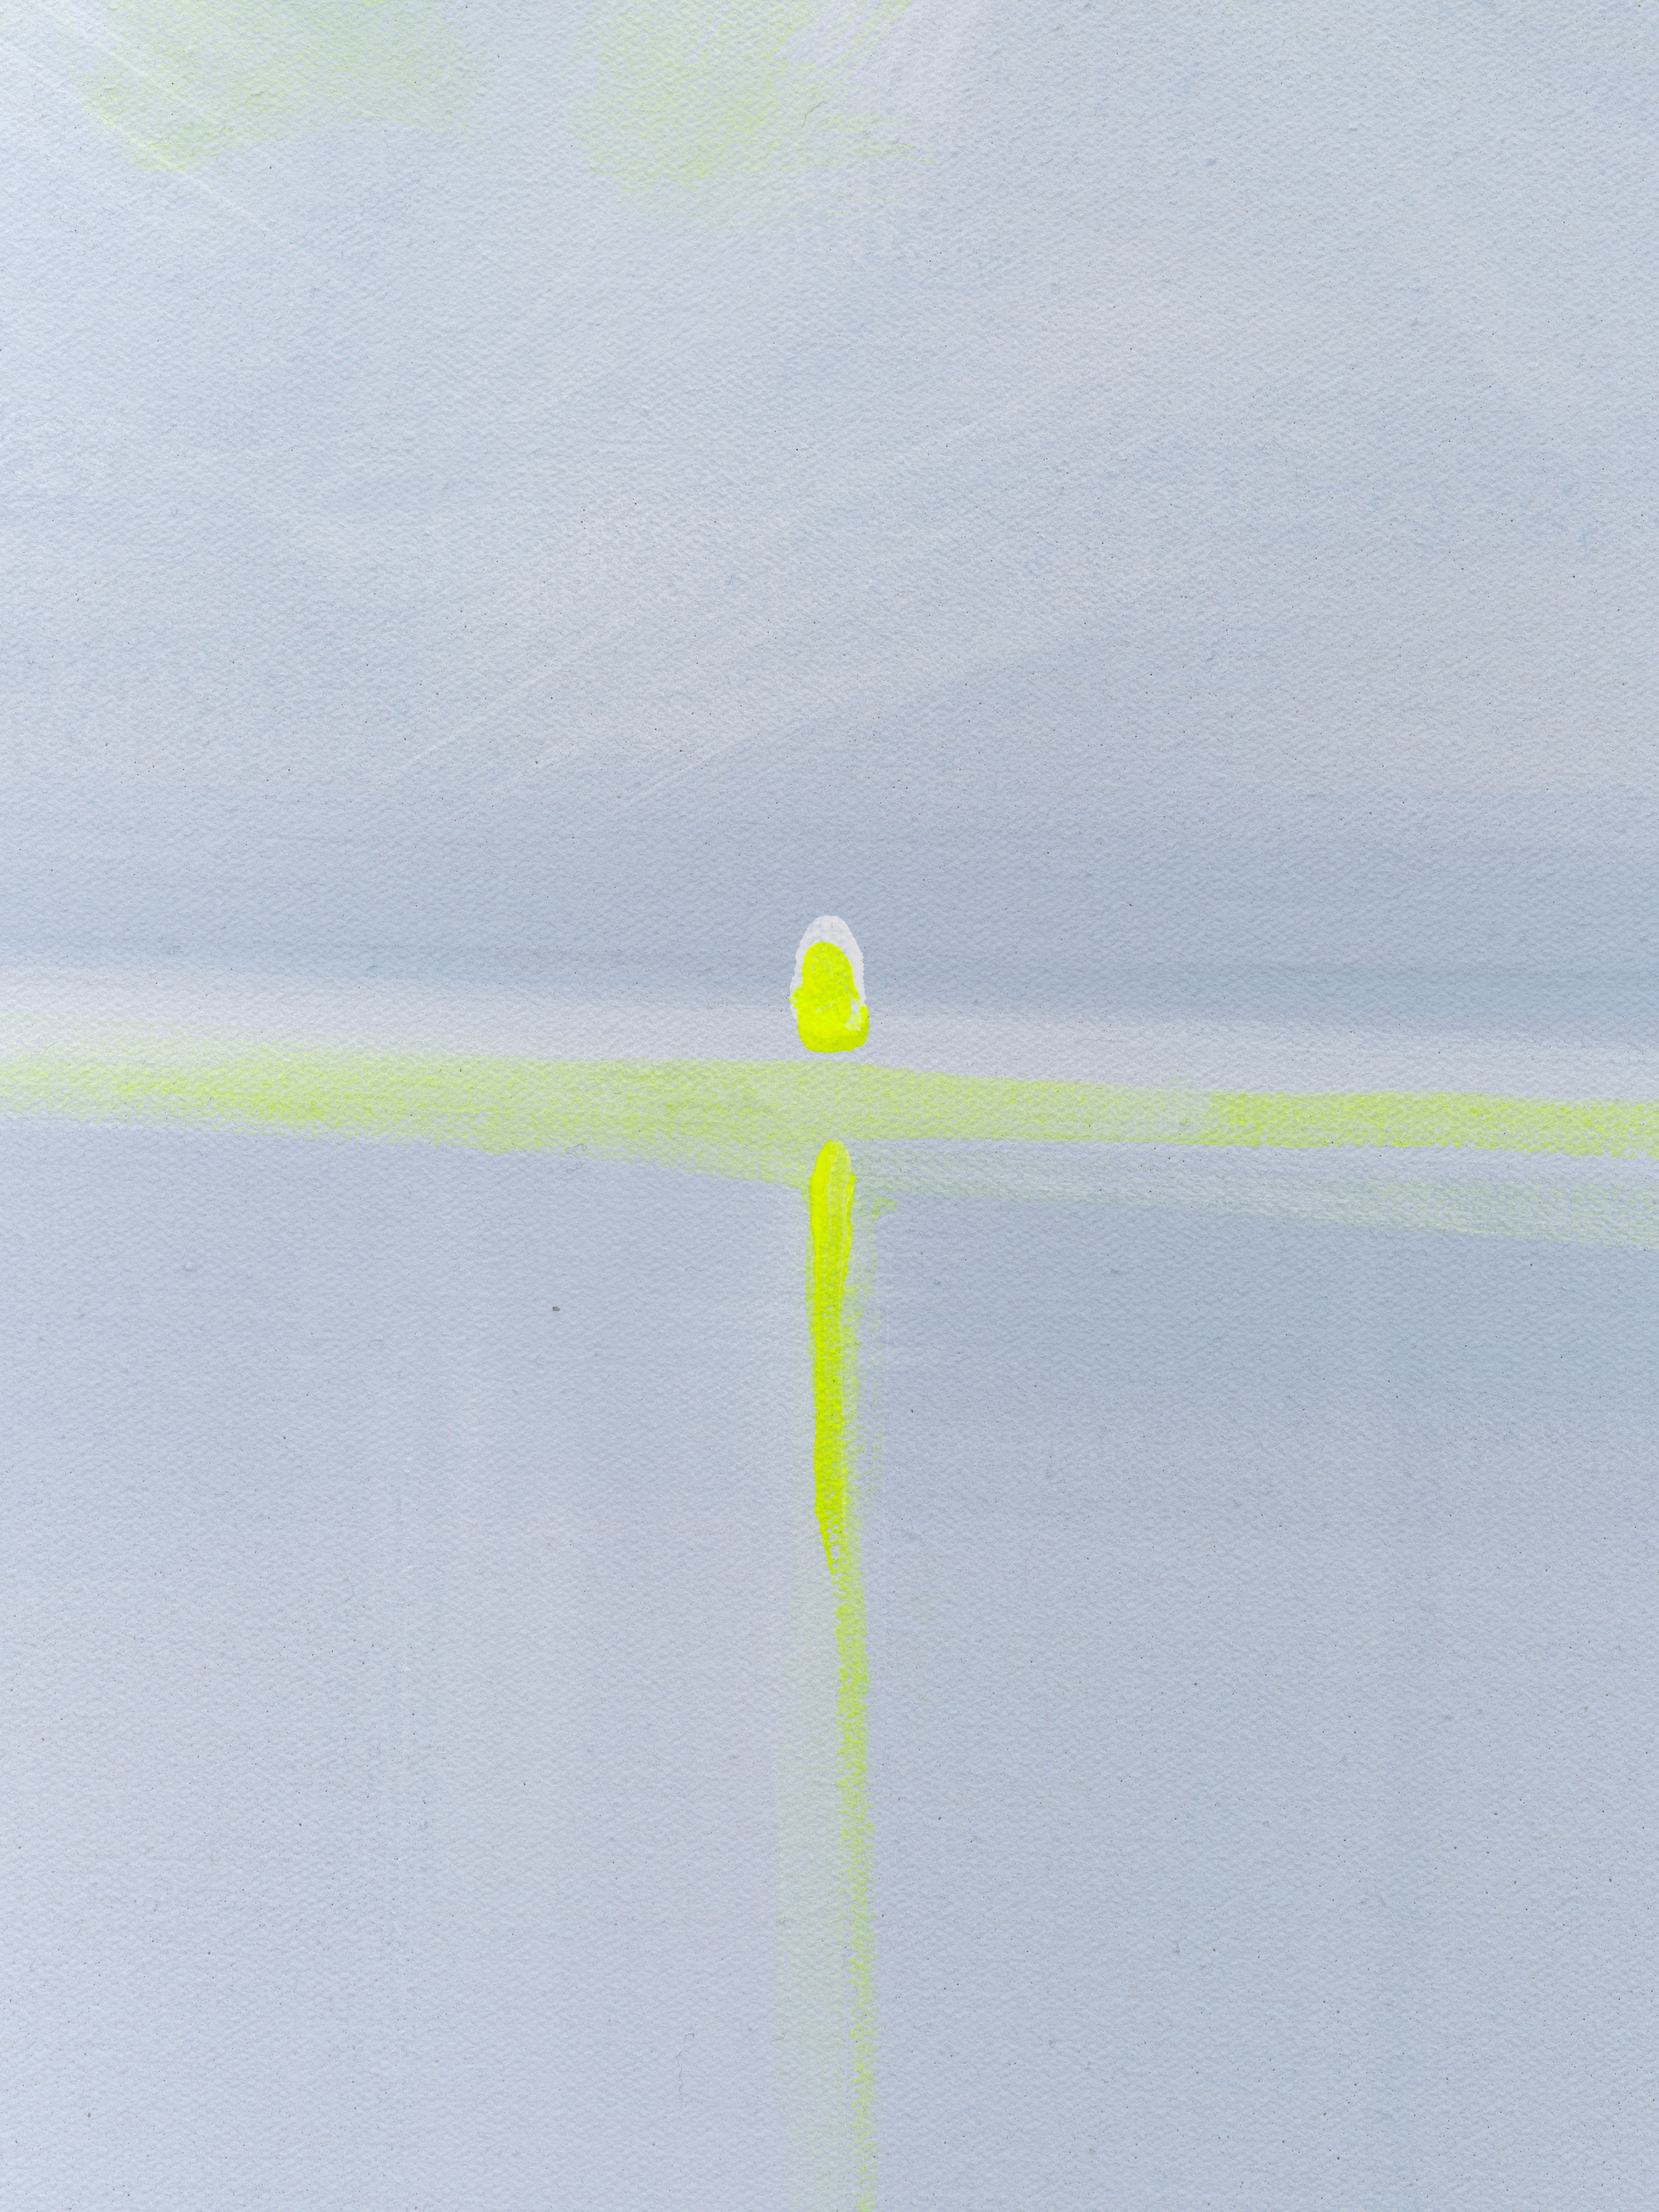 A detail of Wanda Koop’s “Black Sea Portal - Luminous Yellow” with a neon yellow dot and strokes again an ice blue background 